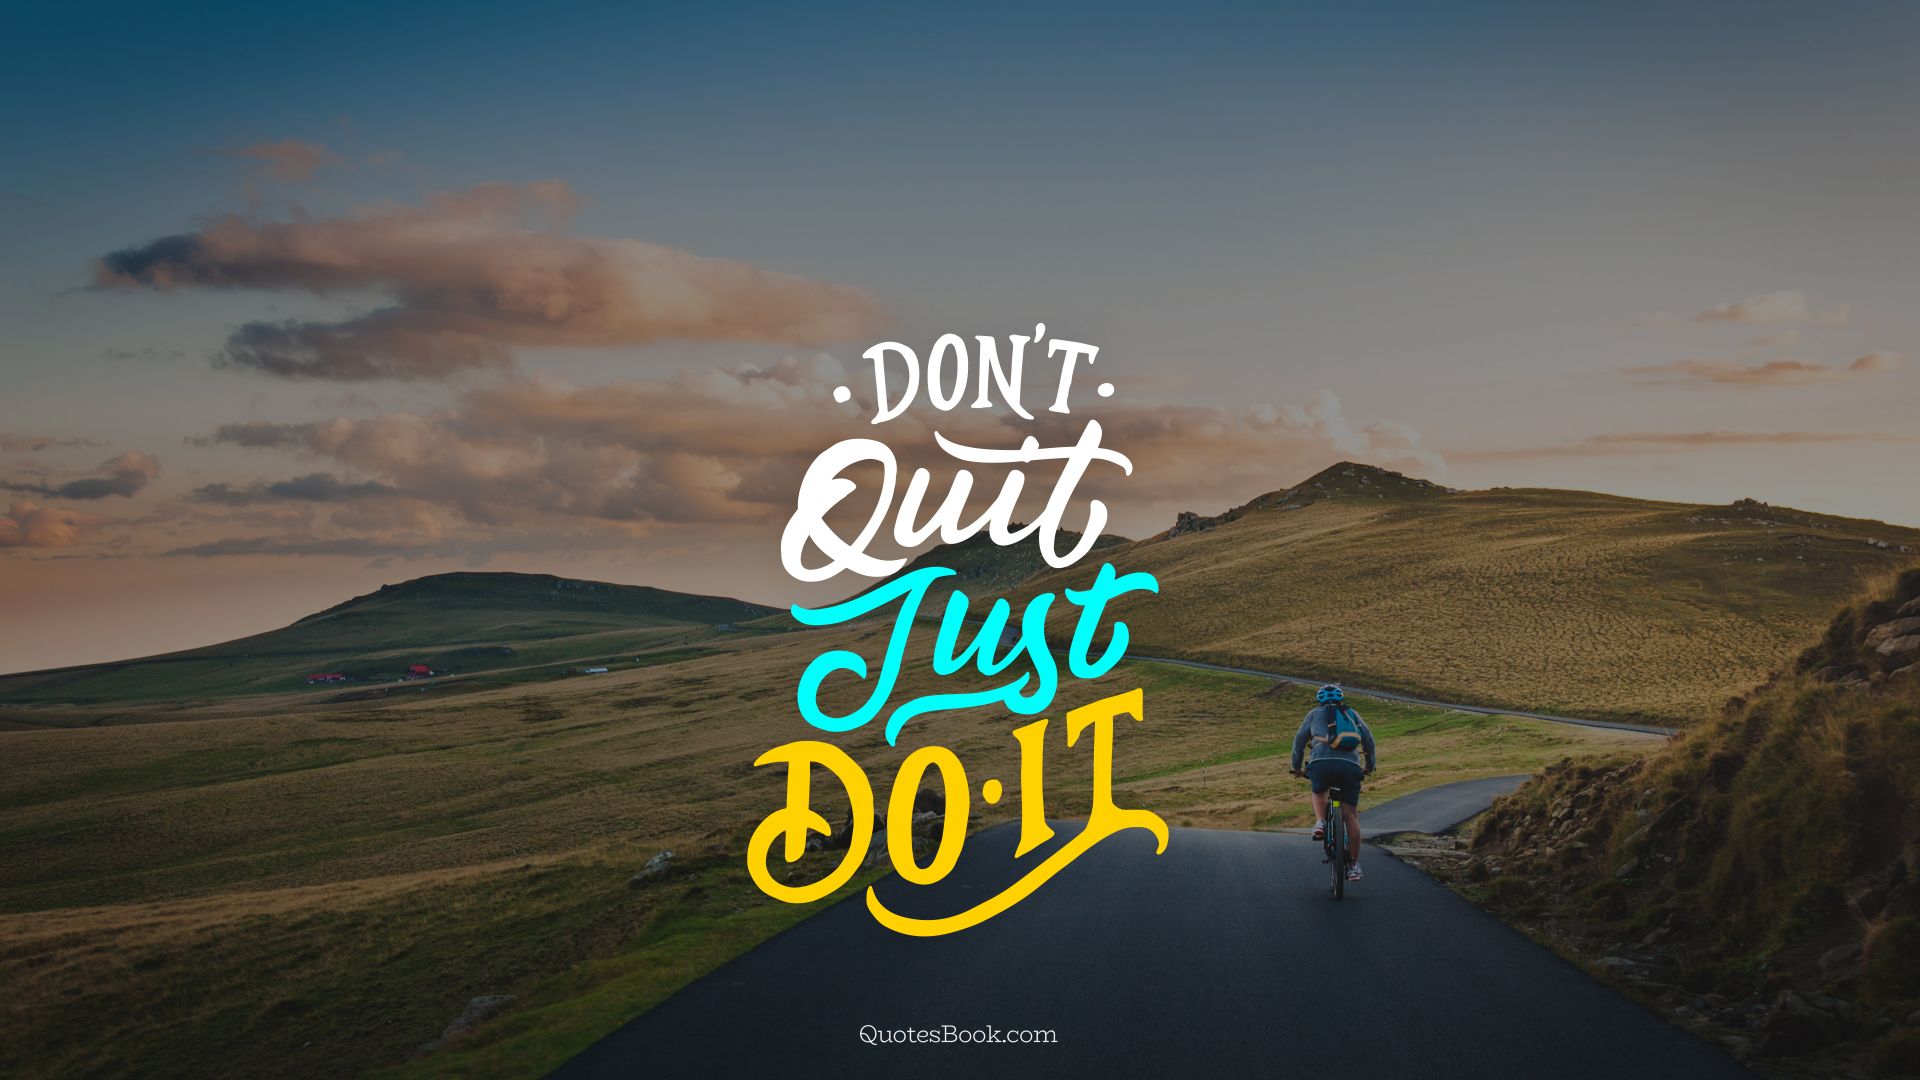 Don't quit just do it